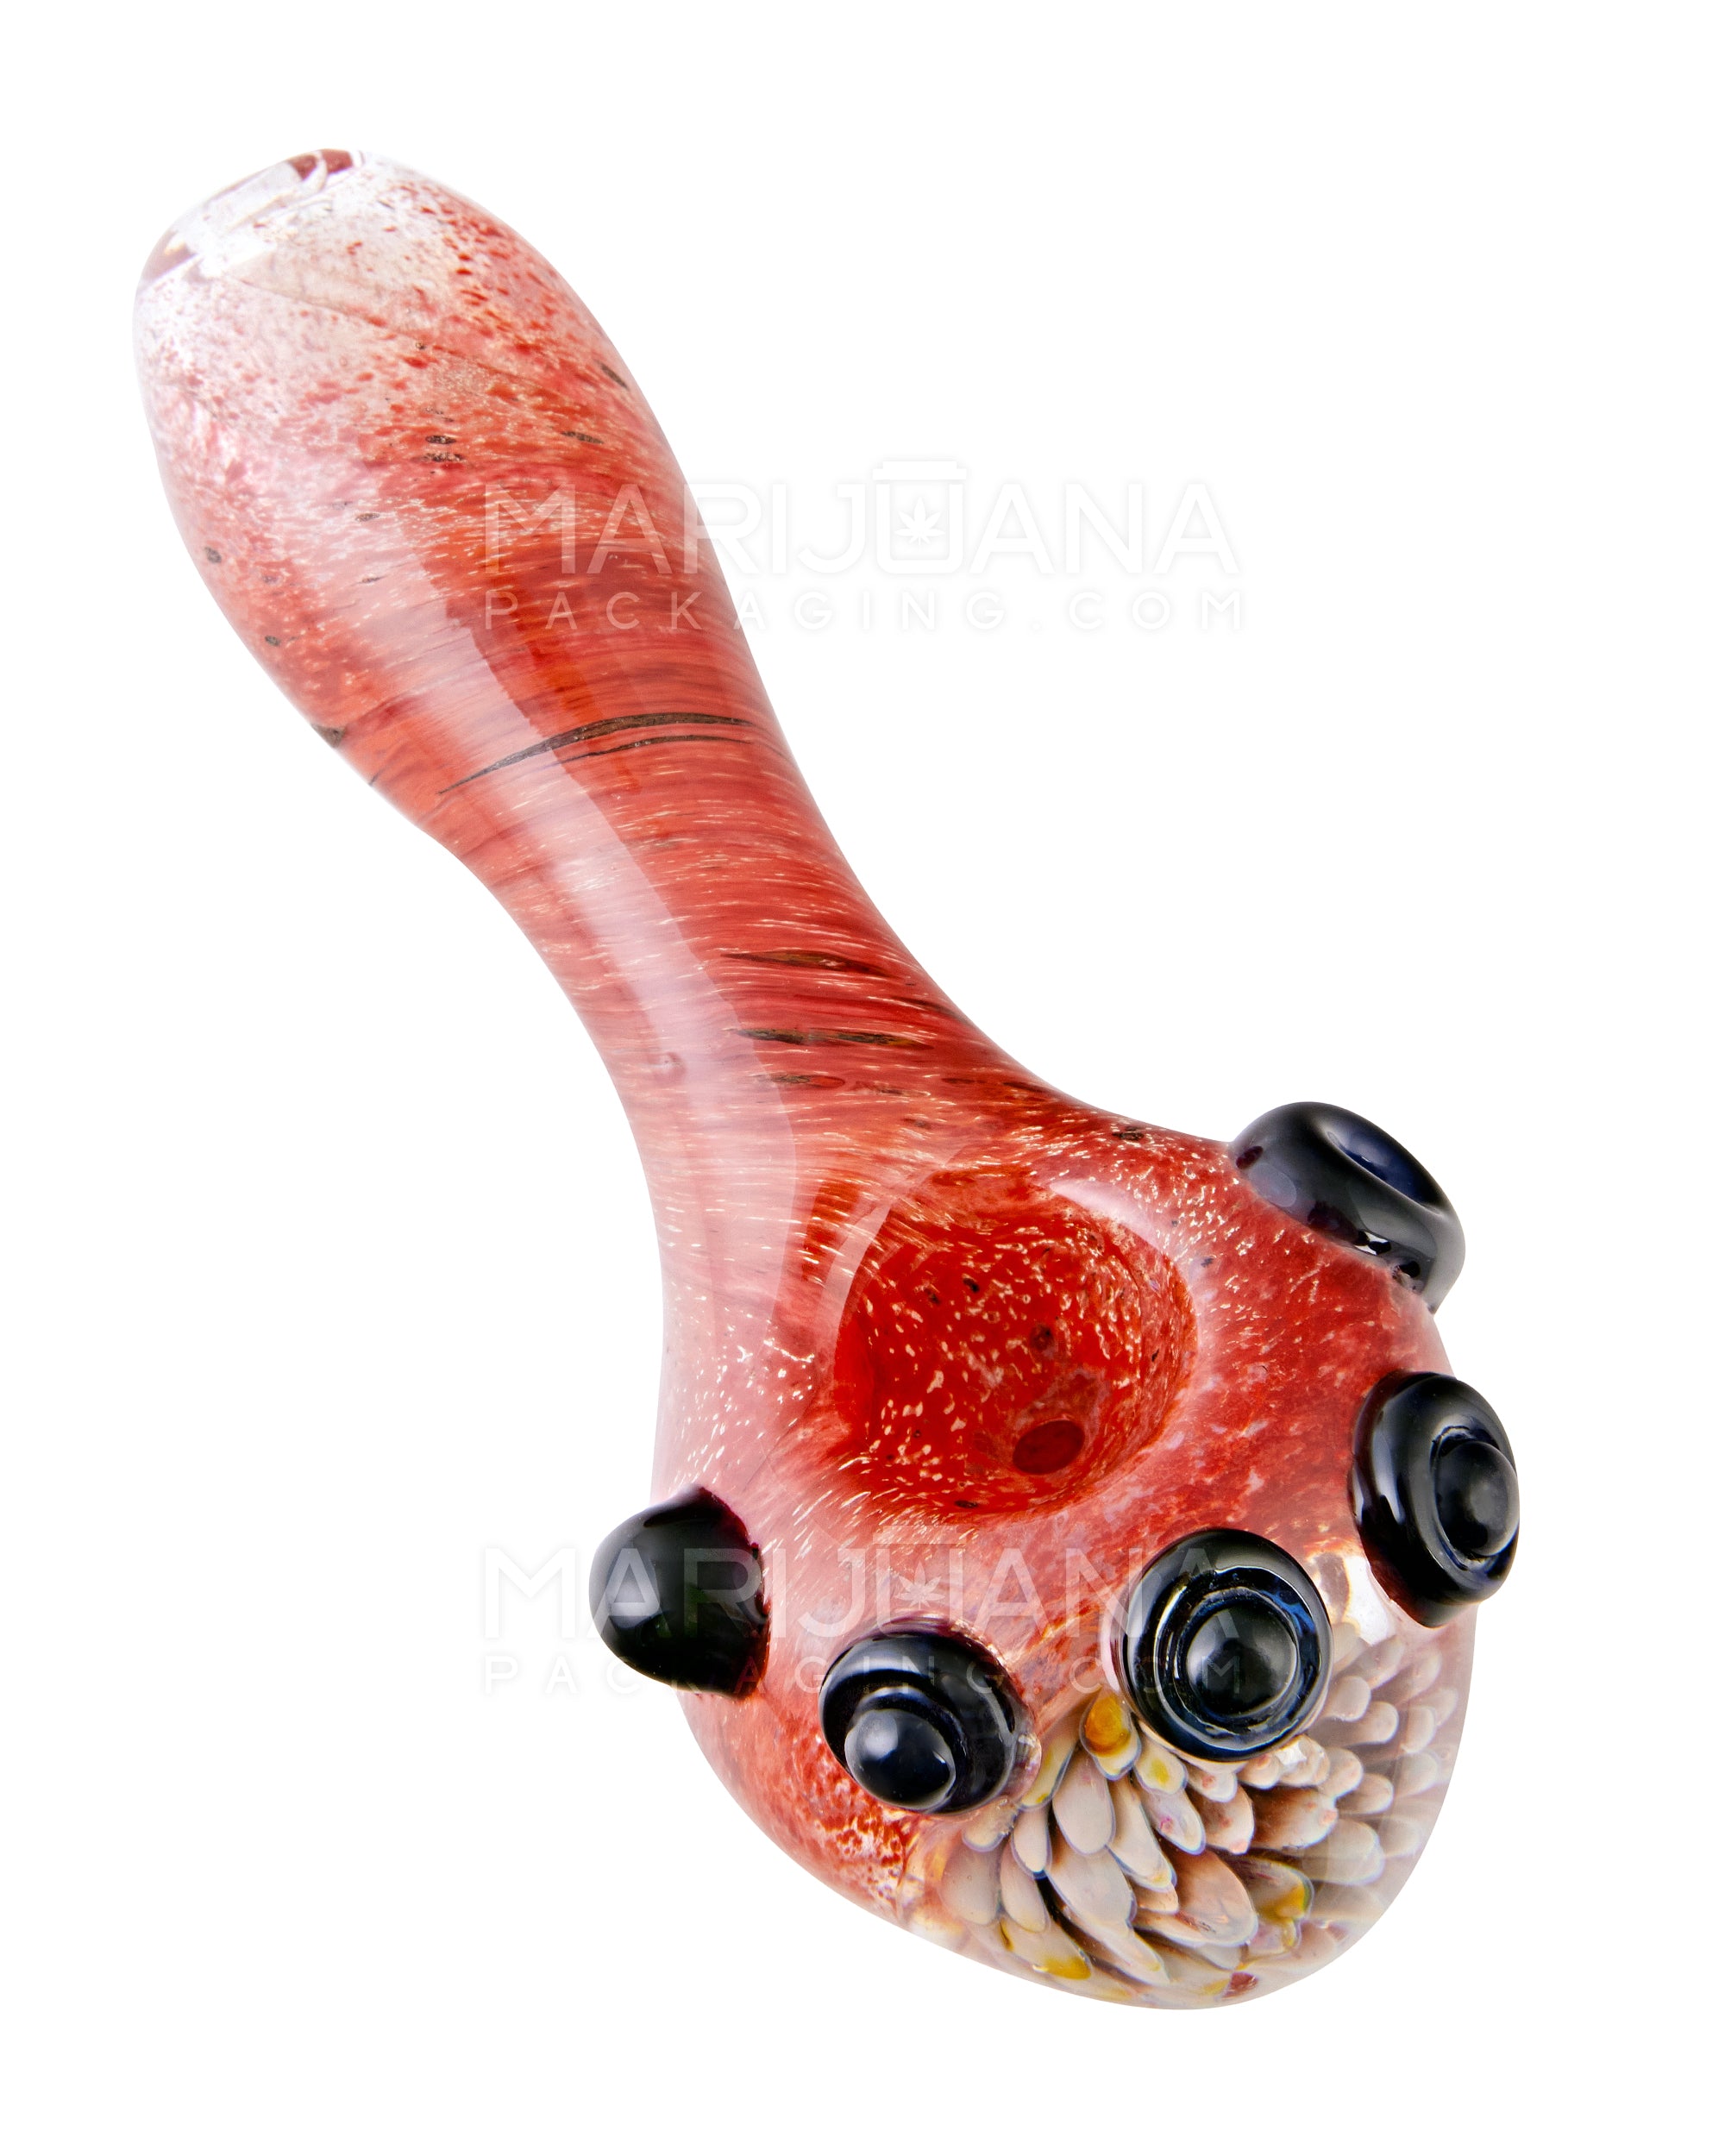 Frit & Fumed Spoon Hand Pipe w/ Flower Implosion | 4.5in Long - Glass - Assorted